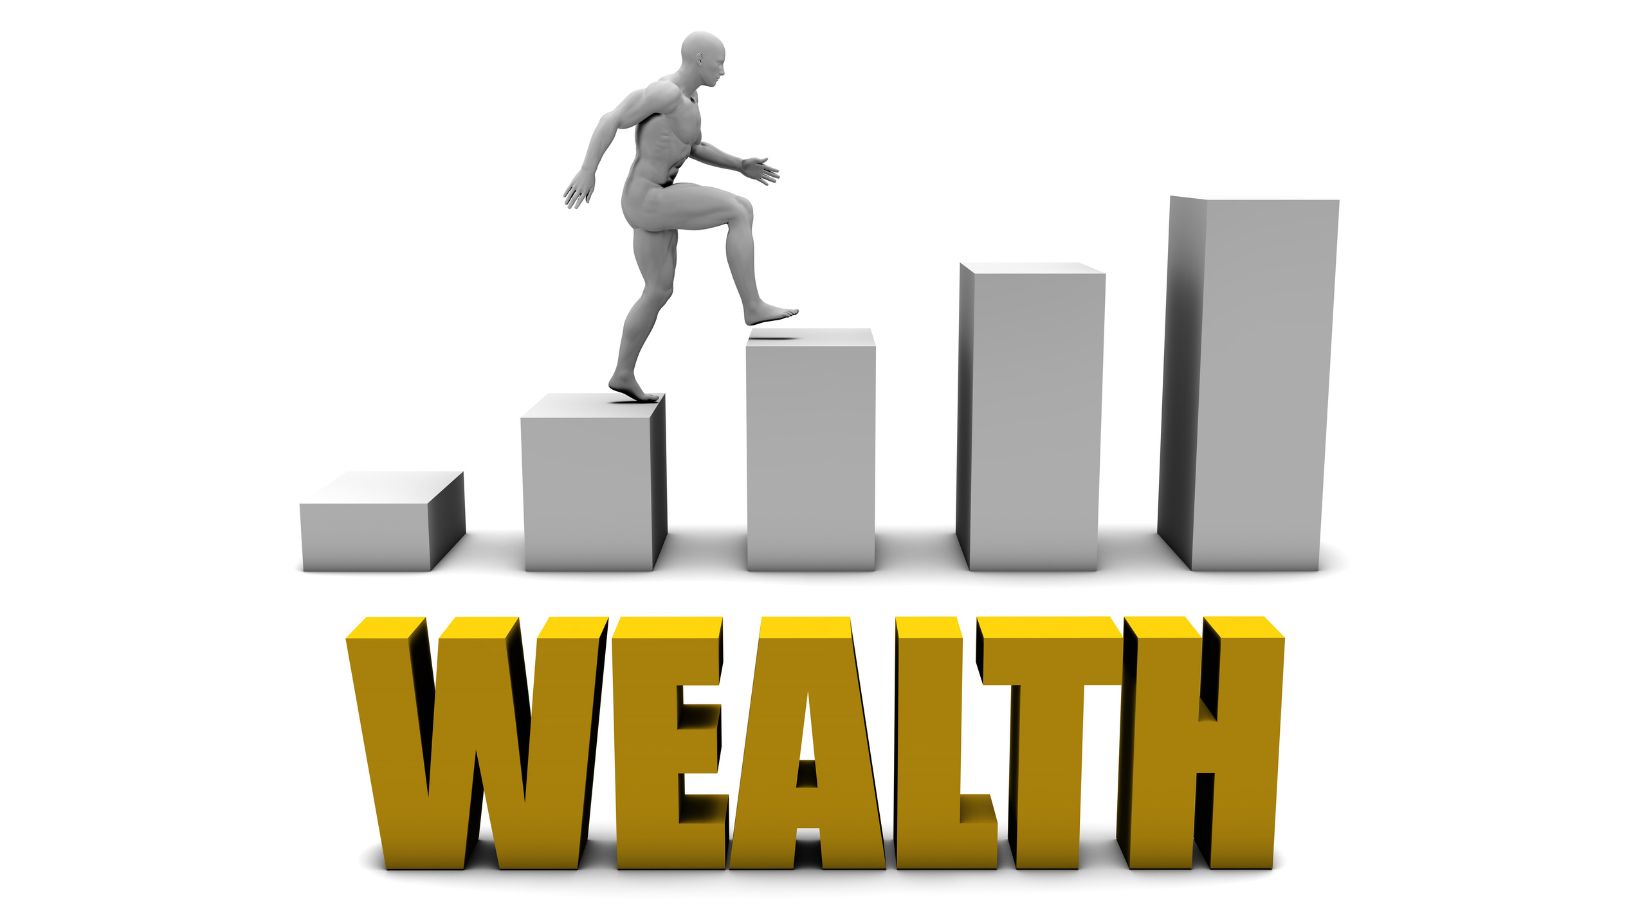 Creating Generational Wealth Quotes: Inspiring Wisdom for Long-Term ...